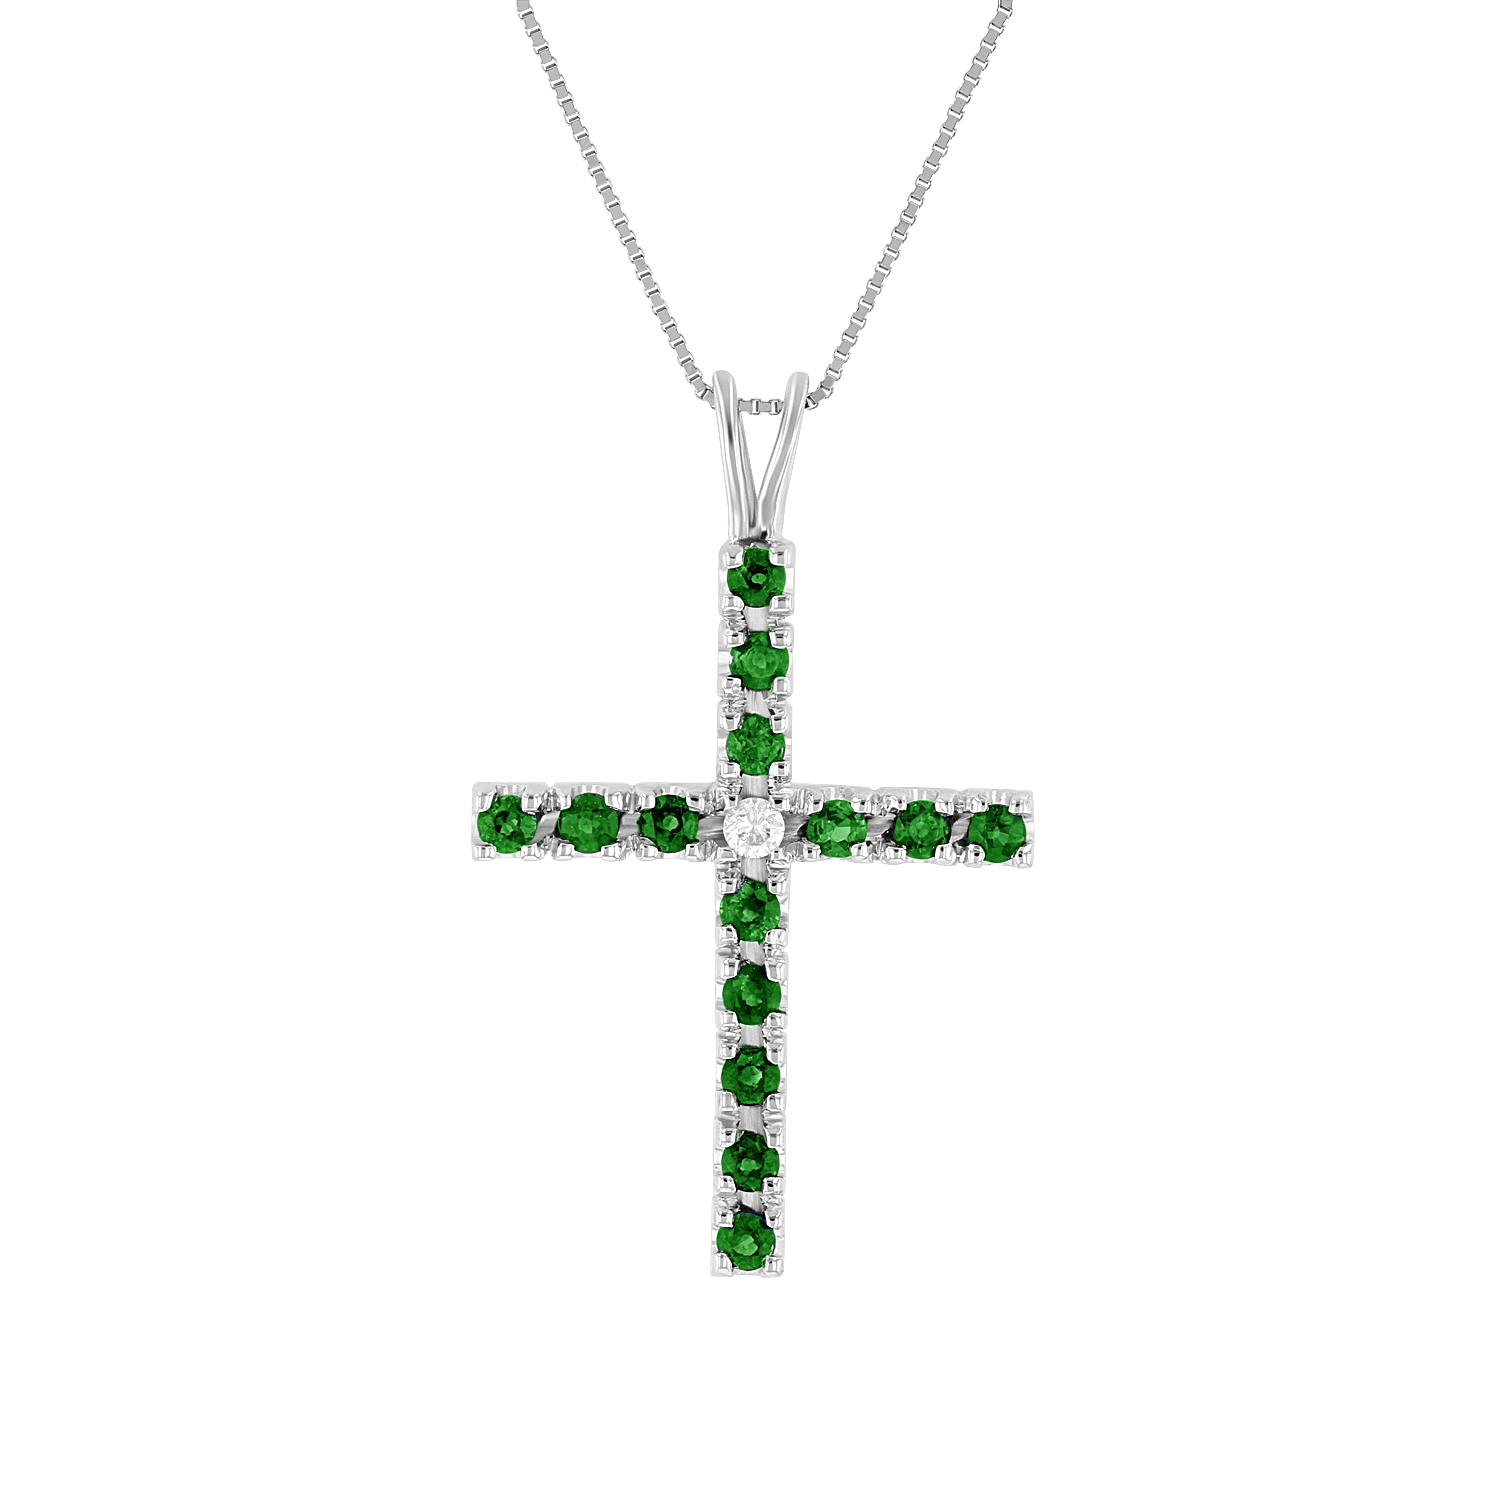 View 0.75ctw Diamond and Emerald Cross Pendant in 14k White Gold